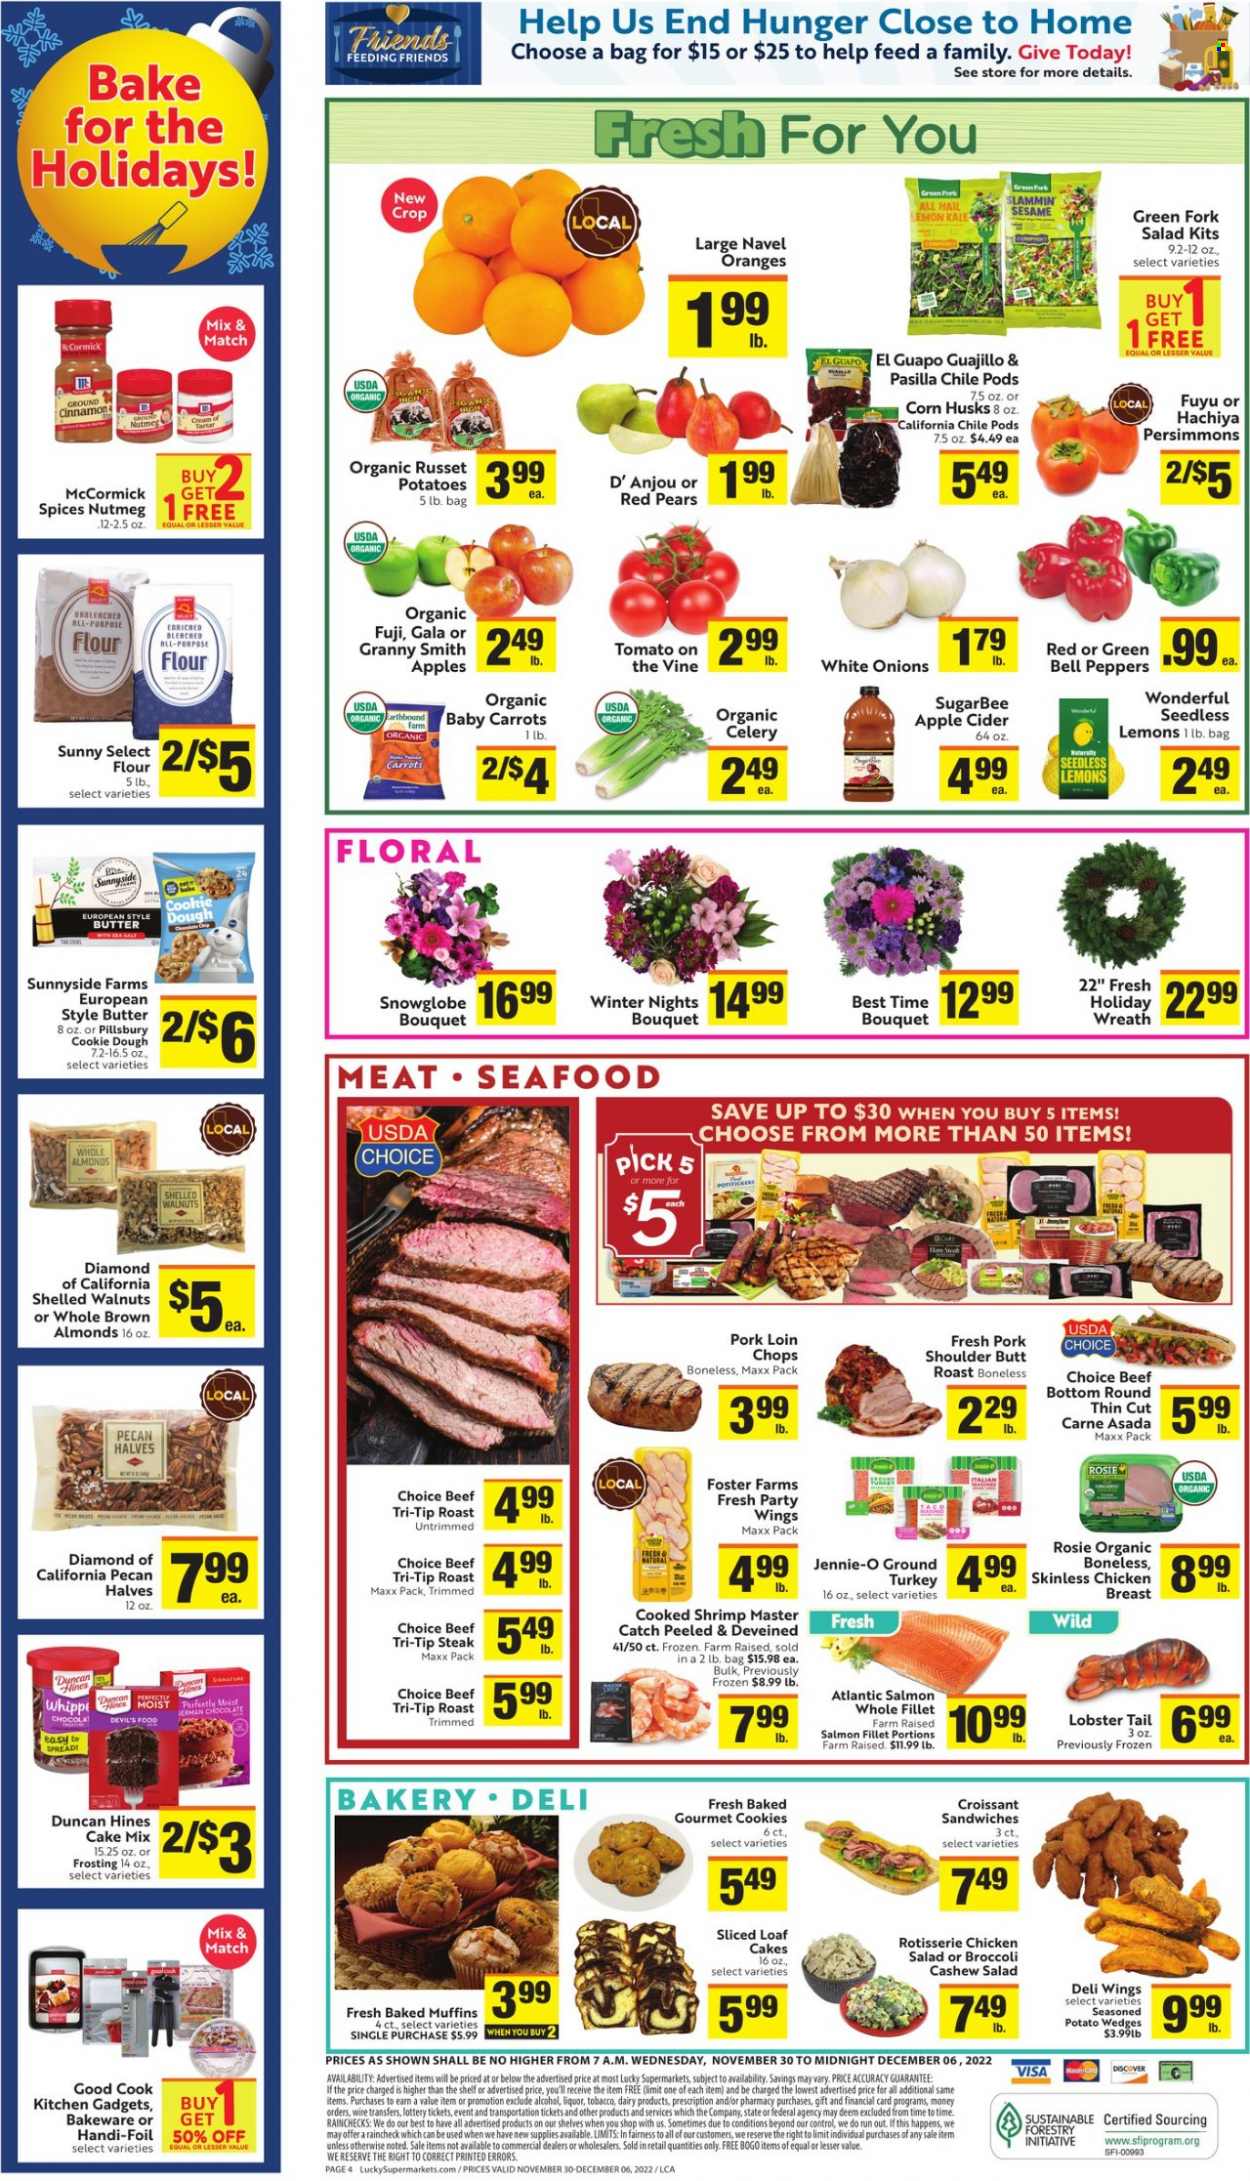 thumbnail - Lucky California Flyer - 11/30/2022 - 12/06/2022 - Sales products - croissant, muffin, cake mix, bell peppers, broccoli, carrots, celery, corn, russet potatoes, kale, potatoes, onion, peppers, Gala, pears, persimmons, oranges, Granny Smith, lobster, salmon, salmon fillet, seafood, lobster tail, shrimps, chicken roast, sandwich, Pillsbury, chicken salad, butter, potato wedges, cookie dough, cookies, chocolate, flour, frosting, nutmeg, cinnamon, almonds, apple cider, cider, chicken breasts, steak, pork chops, pork loin, pork meat, pork shoulder, lemons, pasilla, navel oranges. Page 4.